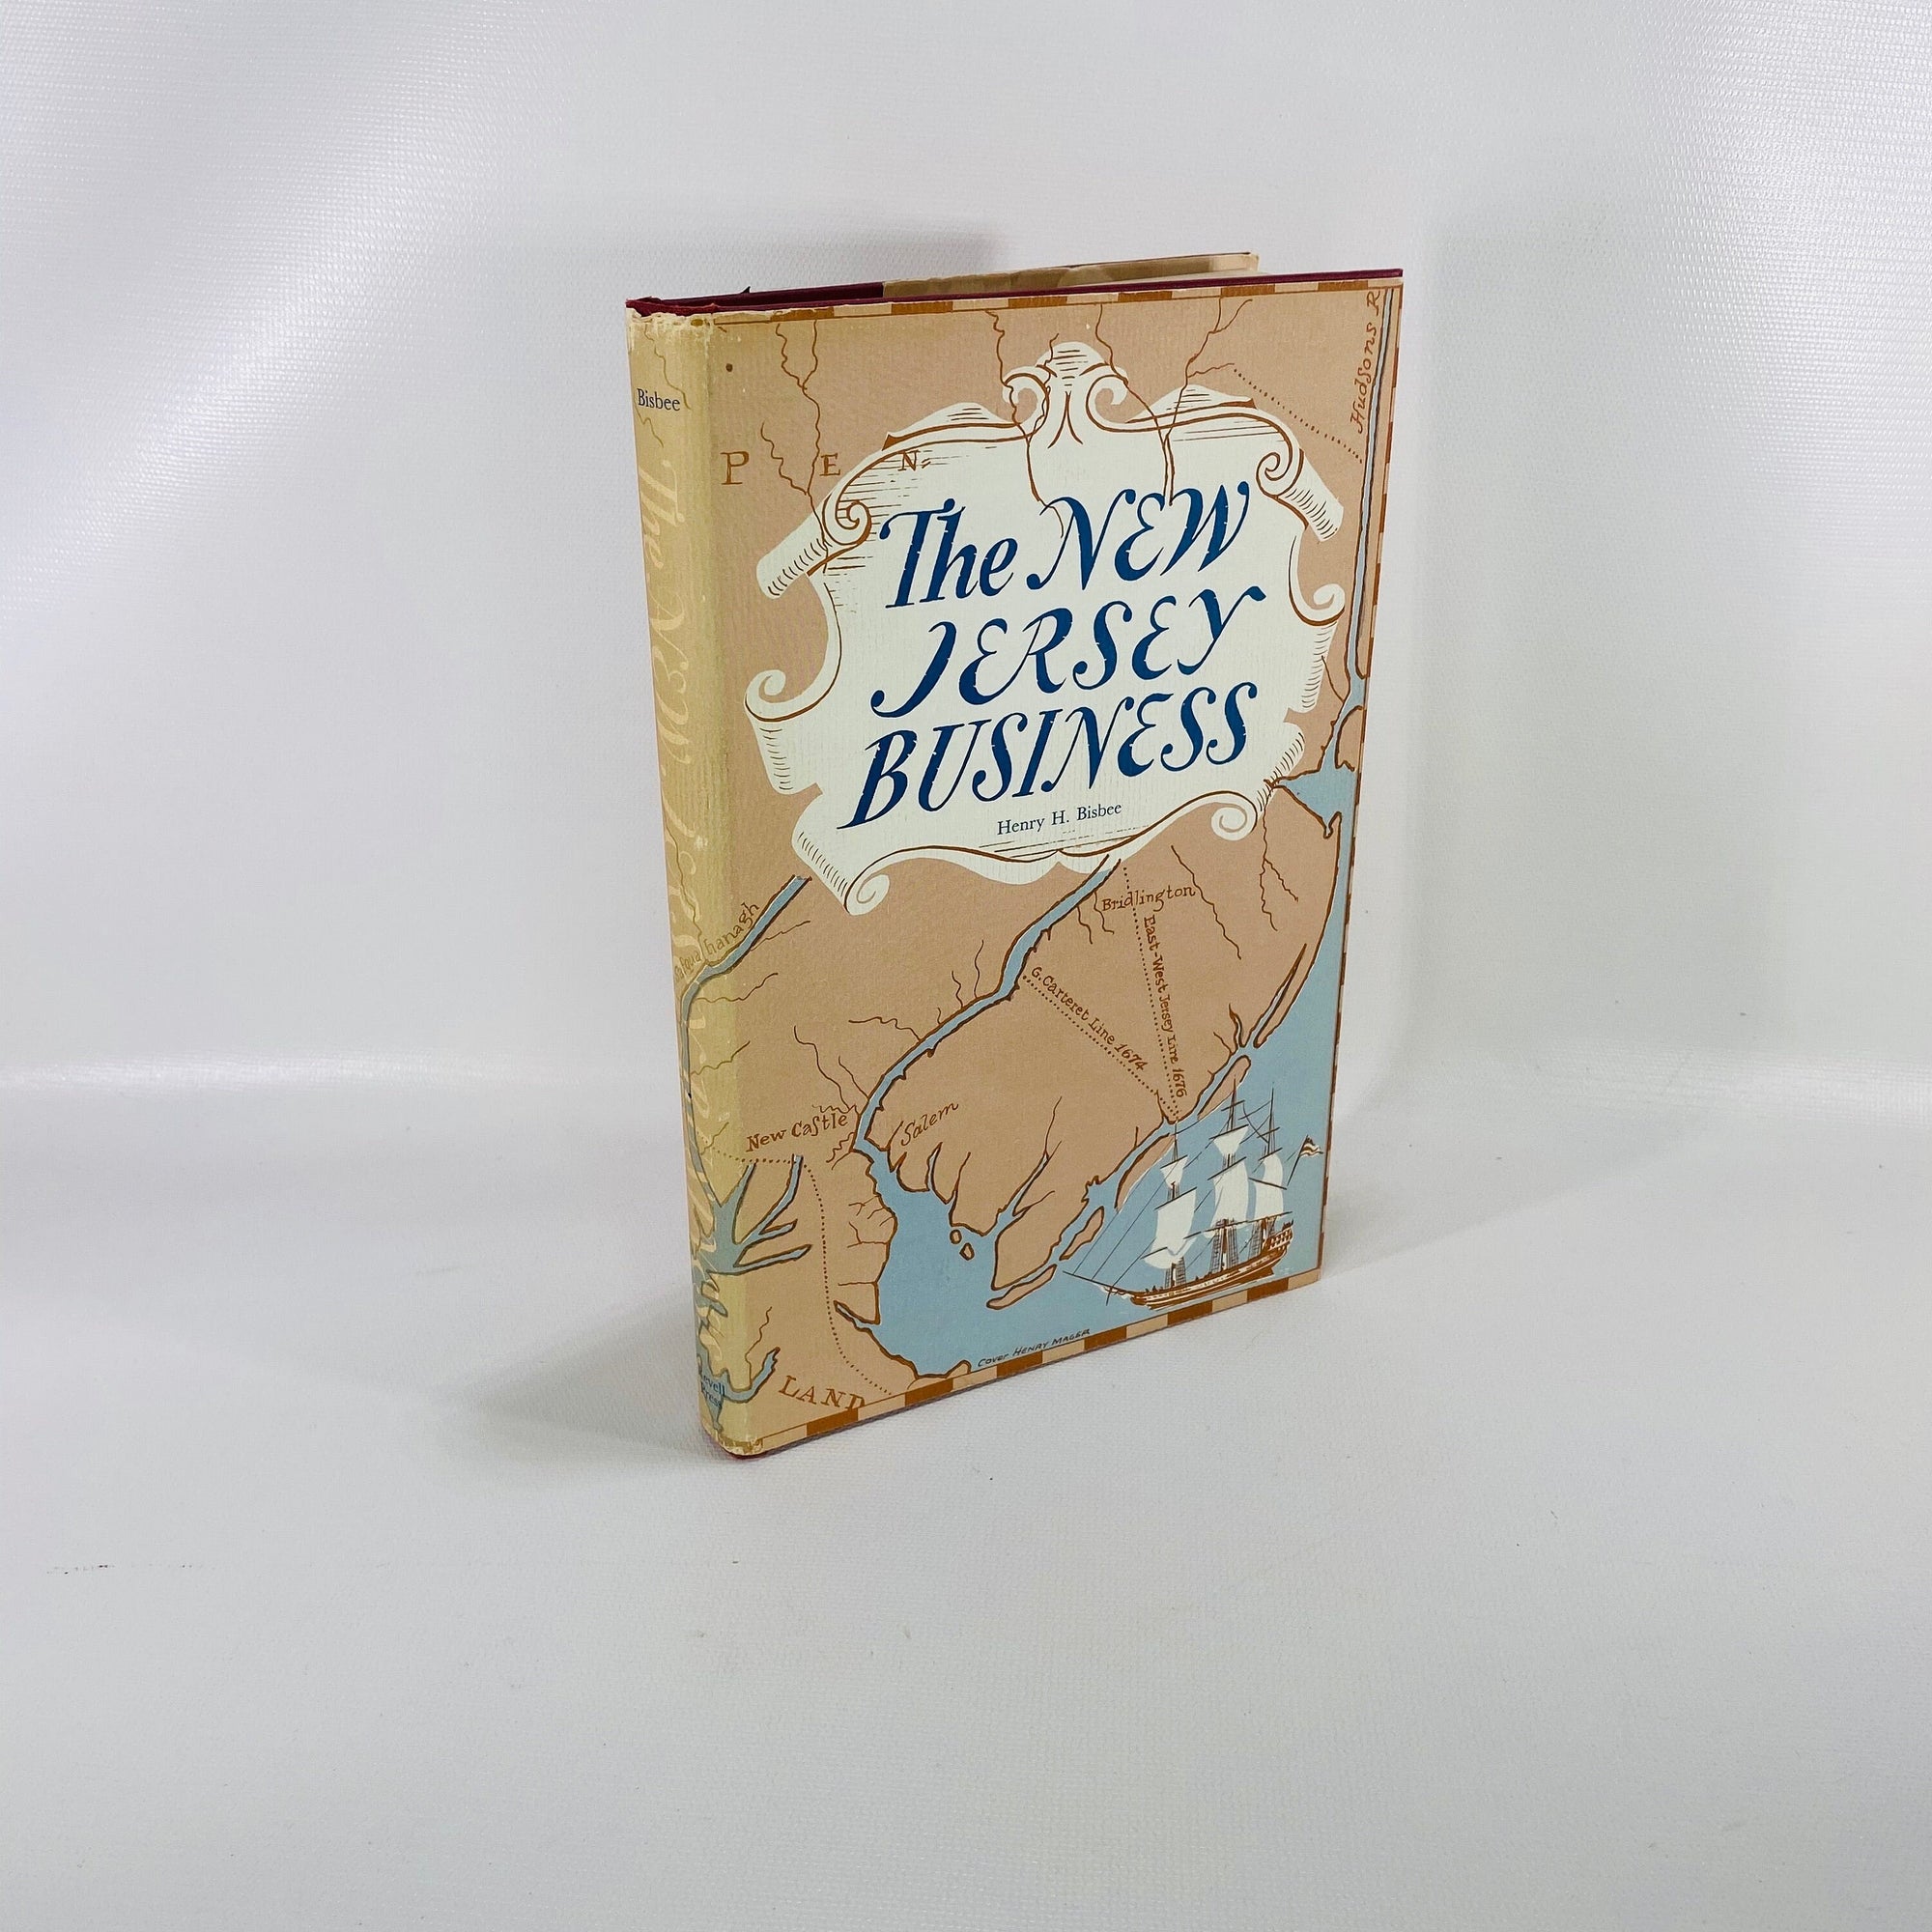 The New Jersey Business by Henry H. Bisbee 1963 Vintage Book